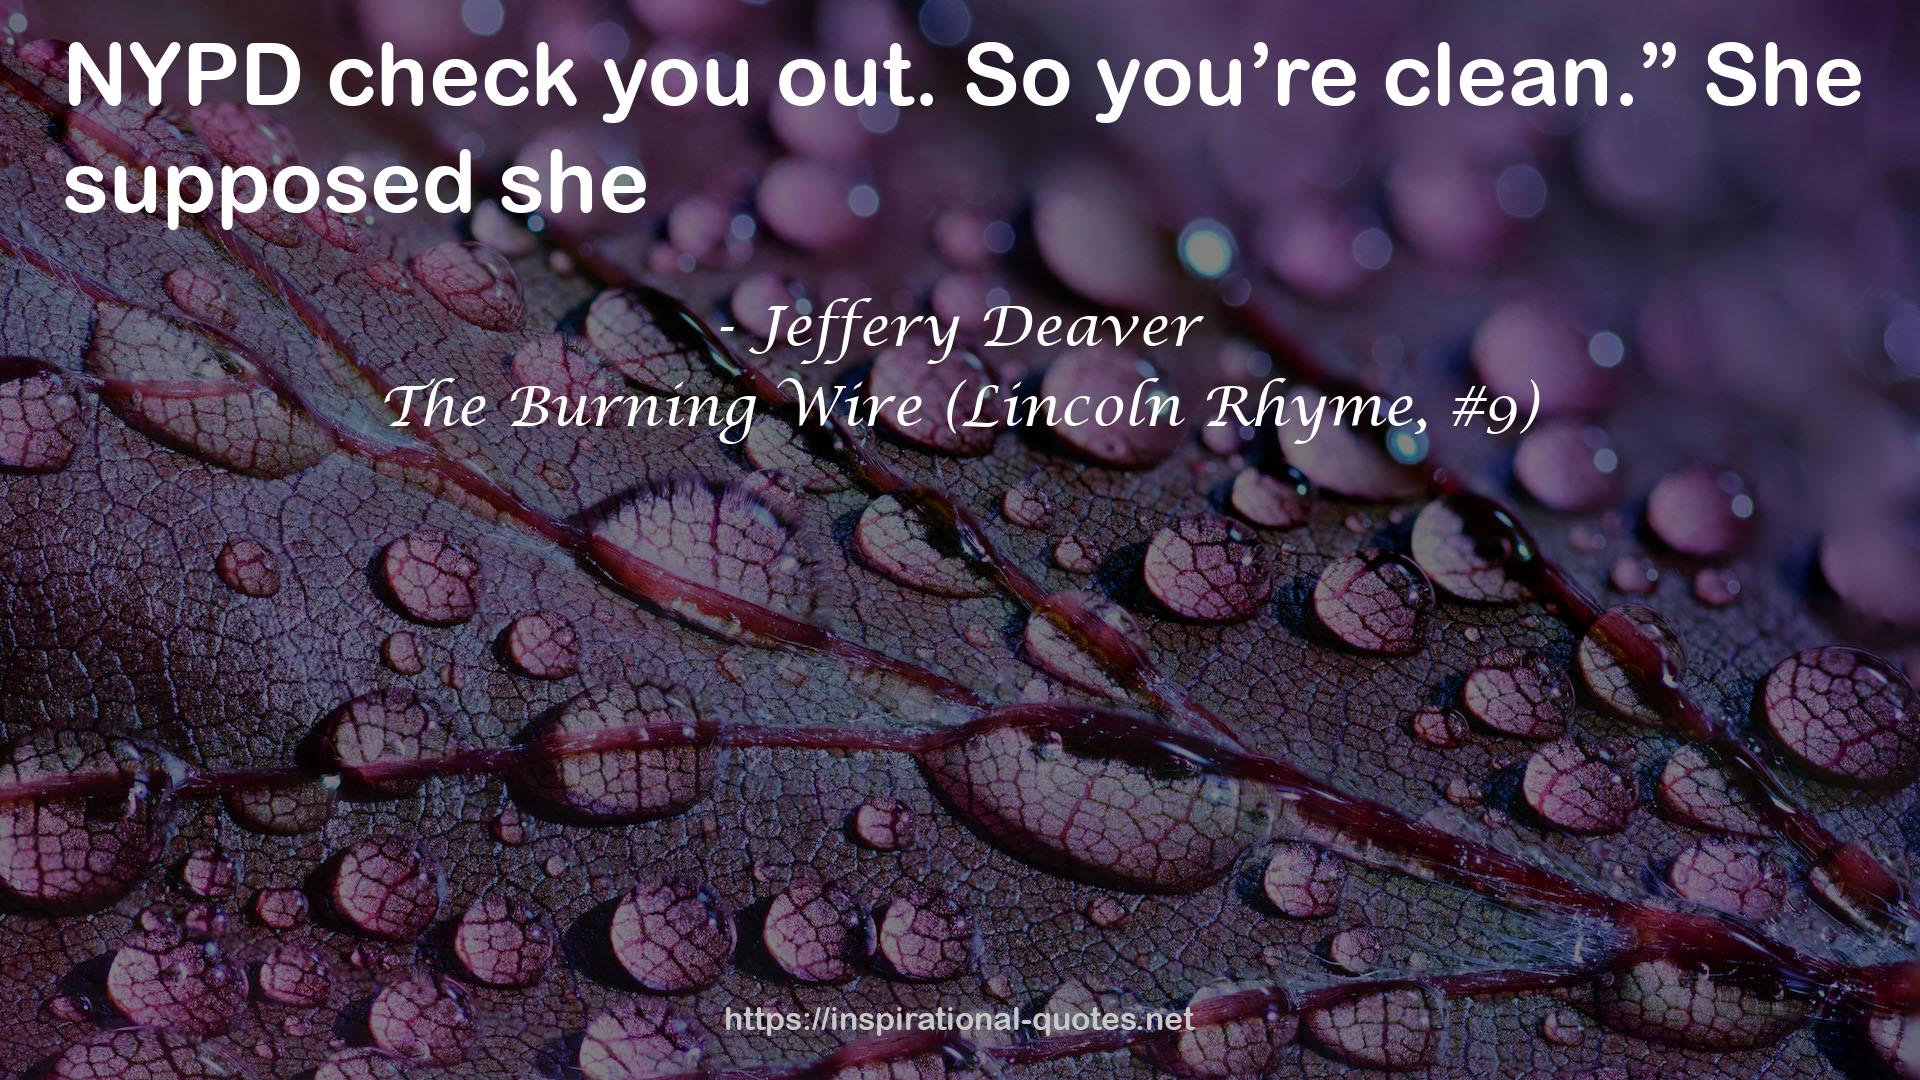 The Burning Wire (Lincoln Rhyme, #9) QUOTES